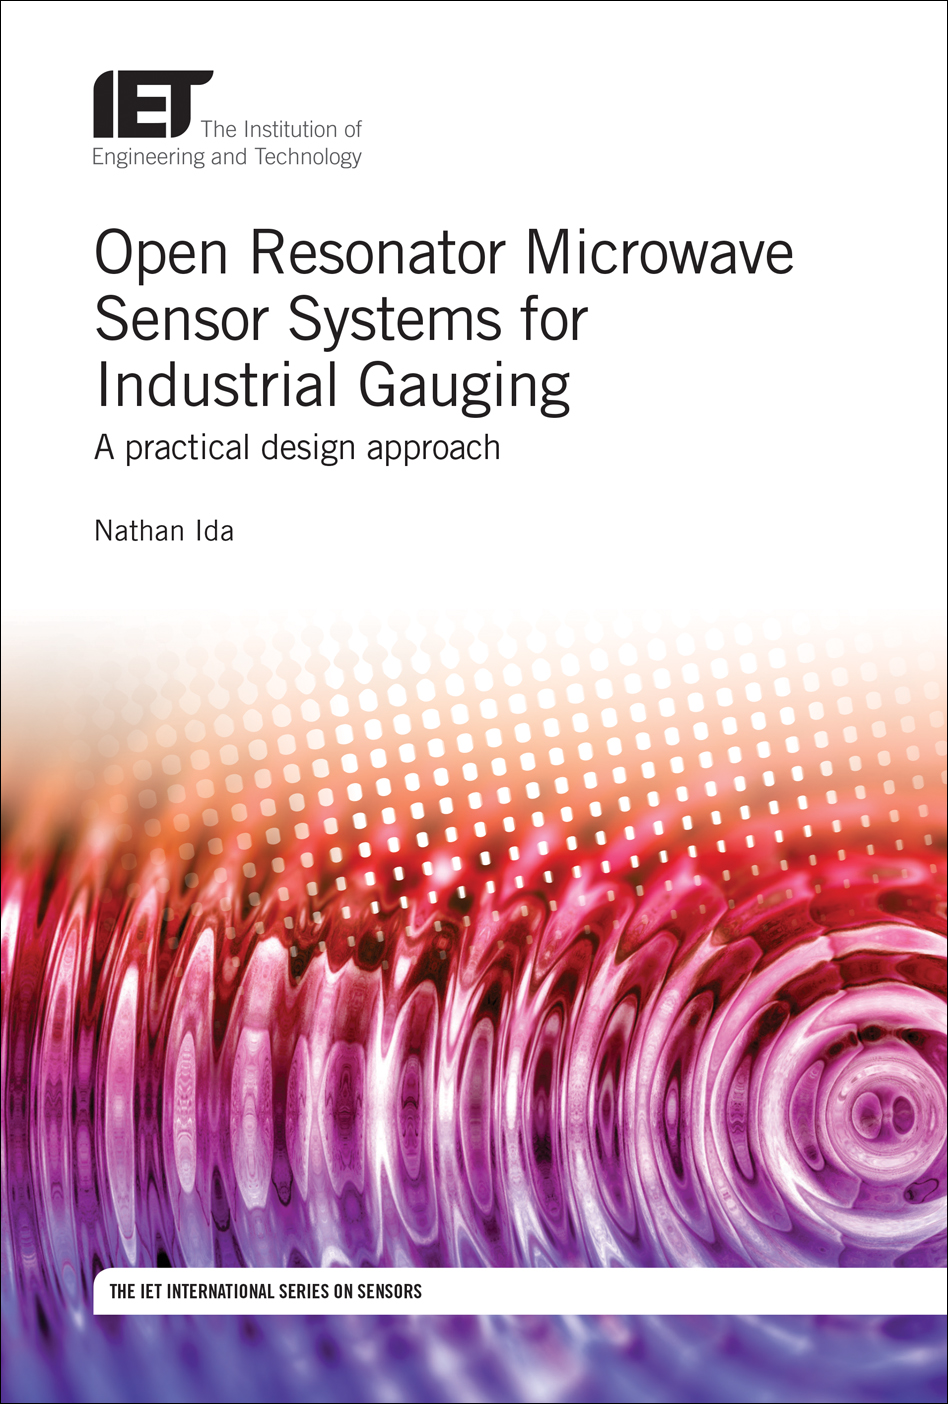 Open Resonator Microwave Sensor Systems for Industrial Gauging, A practical design approach